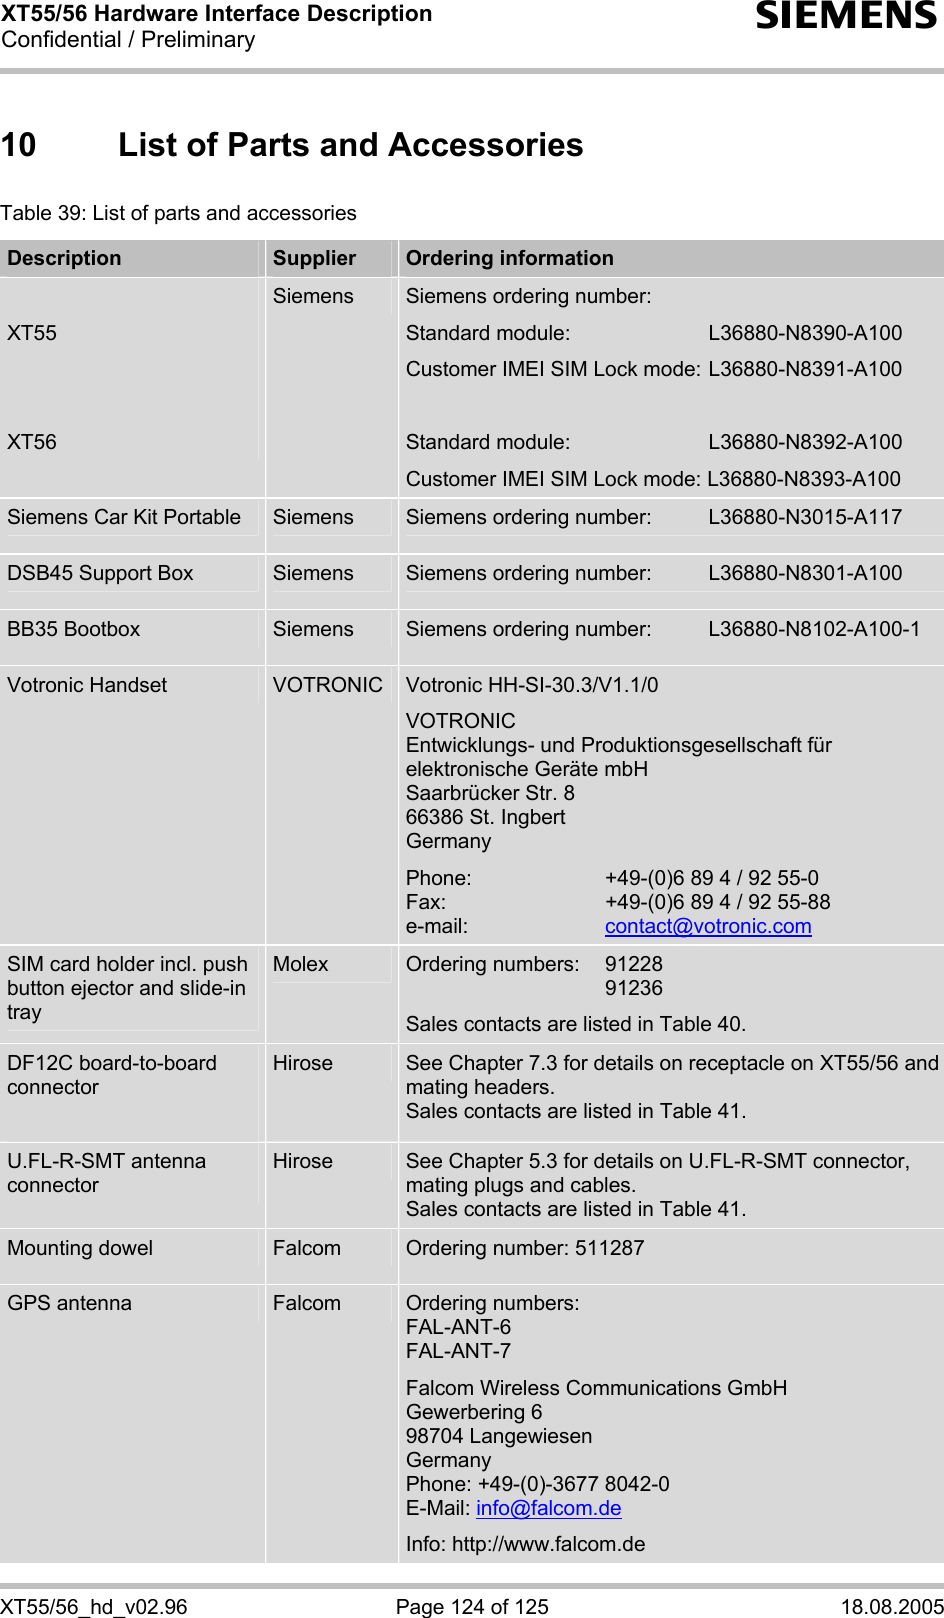 XT55/56 Hardware Interface Description Confidential / Preliminary s XT55/56_hd_v02.96  Page 124 of 125  18.08.2005 10  List of Parts and Accessories Table 39: List of parts and accessories Description  Supplier  Ordering information  XT55   XT56 Siemens  Siemens ordering number:  Standard module:   L36880-N8390-A100 Customer IMEI SIM Lock mode:  L36880-N8391-A100  Standard module:   L36880-N8392-A100 Customer IMEI SIM Lock mode: L36880-N8393-A100 Siemens Car Kit Portable  Siemens  Siemens ordering number:   L36880-N3015-A117 DSB45 Support Box  Siemens  Siemens ordering number:   L36880-N8301-A100 BB35 Bootbox   Siemens  Siemens ordering number:   L36880-N8102-A100-1 Votronic Handset  VOTRONIC  Votronic HH-SI-30.3/V1.1/0 VOTRONIC  Entwicklungs- und Produktionsgesellschaft für elektronische Geräte mbH Saarbrücker Str. 8 66386 St. Ingbert Germany Phone:   +49-(0)6 89 4 / 92 55-0 Fax:   +49-(0)6 89 4 / 92 55-88 e-mail:   contact@votronic.com SIM card holder incl. push button ejector and slide-in tray Molex  Ordering numbers:  91228   91236 Sales contacts are listed in Table 40. DF12C board-to-board connector  Hirose  See Chapter 7.3 for details on receptacle on XT55/56 and mating headers. Sales contacts are listed in Table 41. U.FL-R-SMT antenna connector Hirose  See Chapter 5.3 for details on U.FL-R-SMT connector, mating plugs and cables. Sales contacts are listed in Table 41. Mounting dowel  Falcom  Ordering number: 511287 GPS antenna  Falcom  Ordering numbers: FAL-ANT-6  FAL-ANT-7  Falcom Wireless Communications GmbH Gewerbering 6 98704 Langewiesen Germany Phone: +49-(0)-3677 8042-0 E-Mail: info@falcom.de Info: http://www.falcom.de 